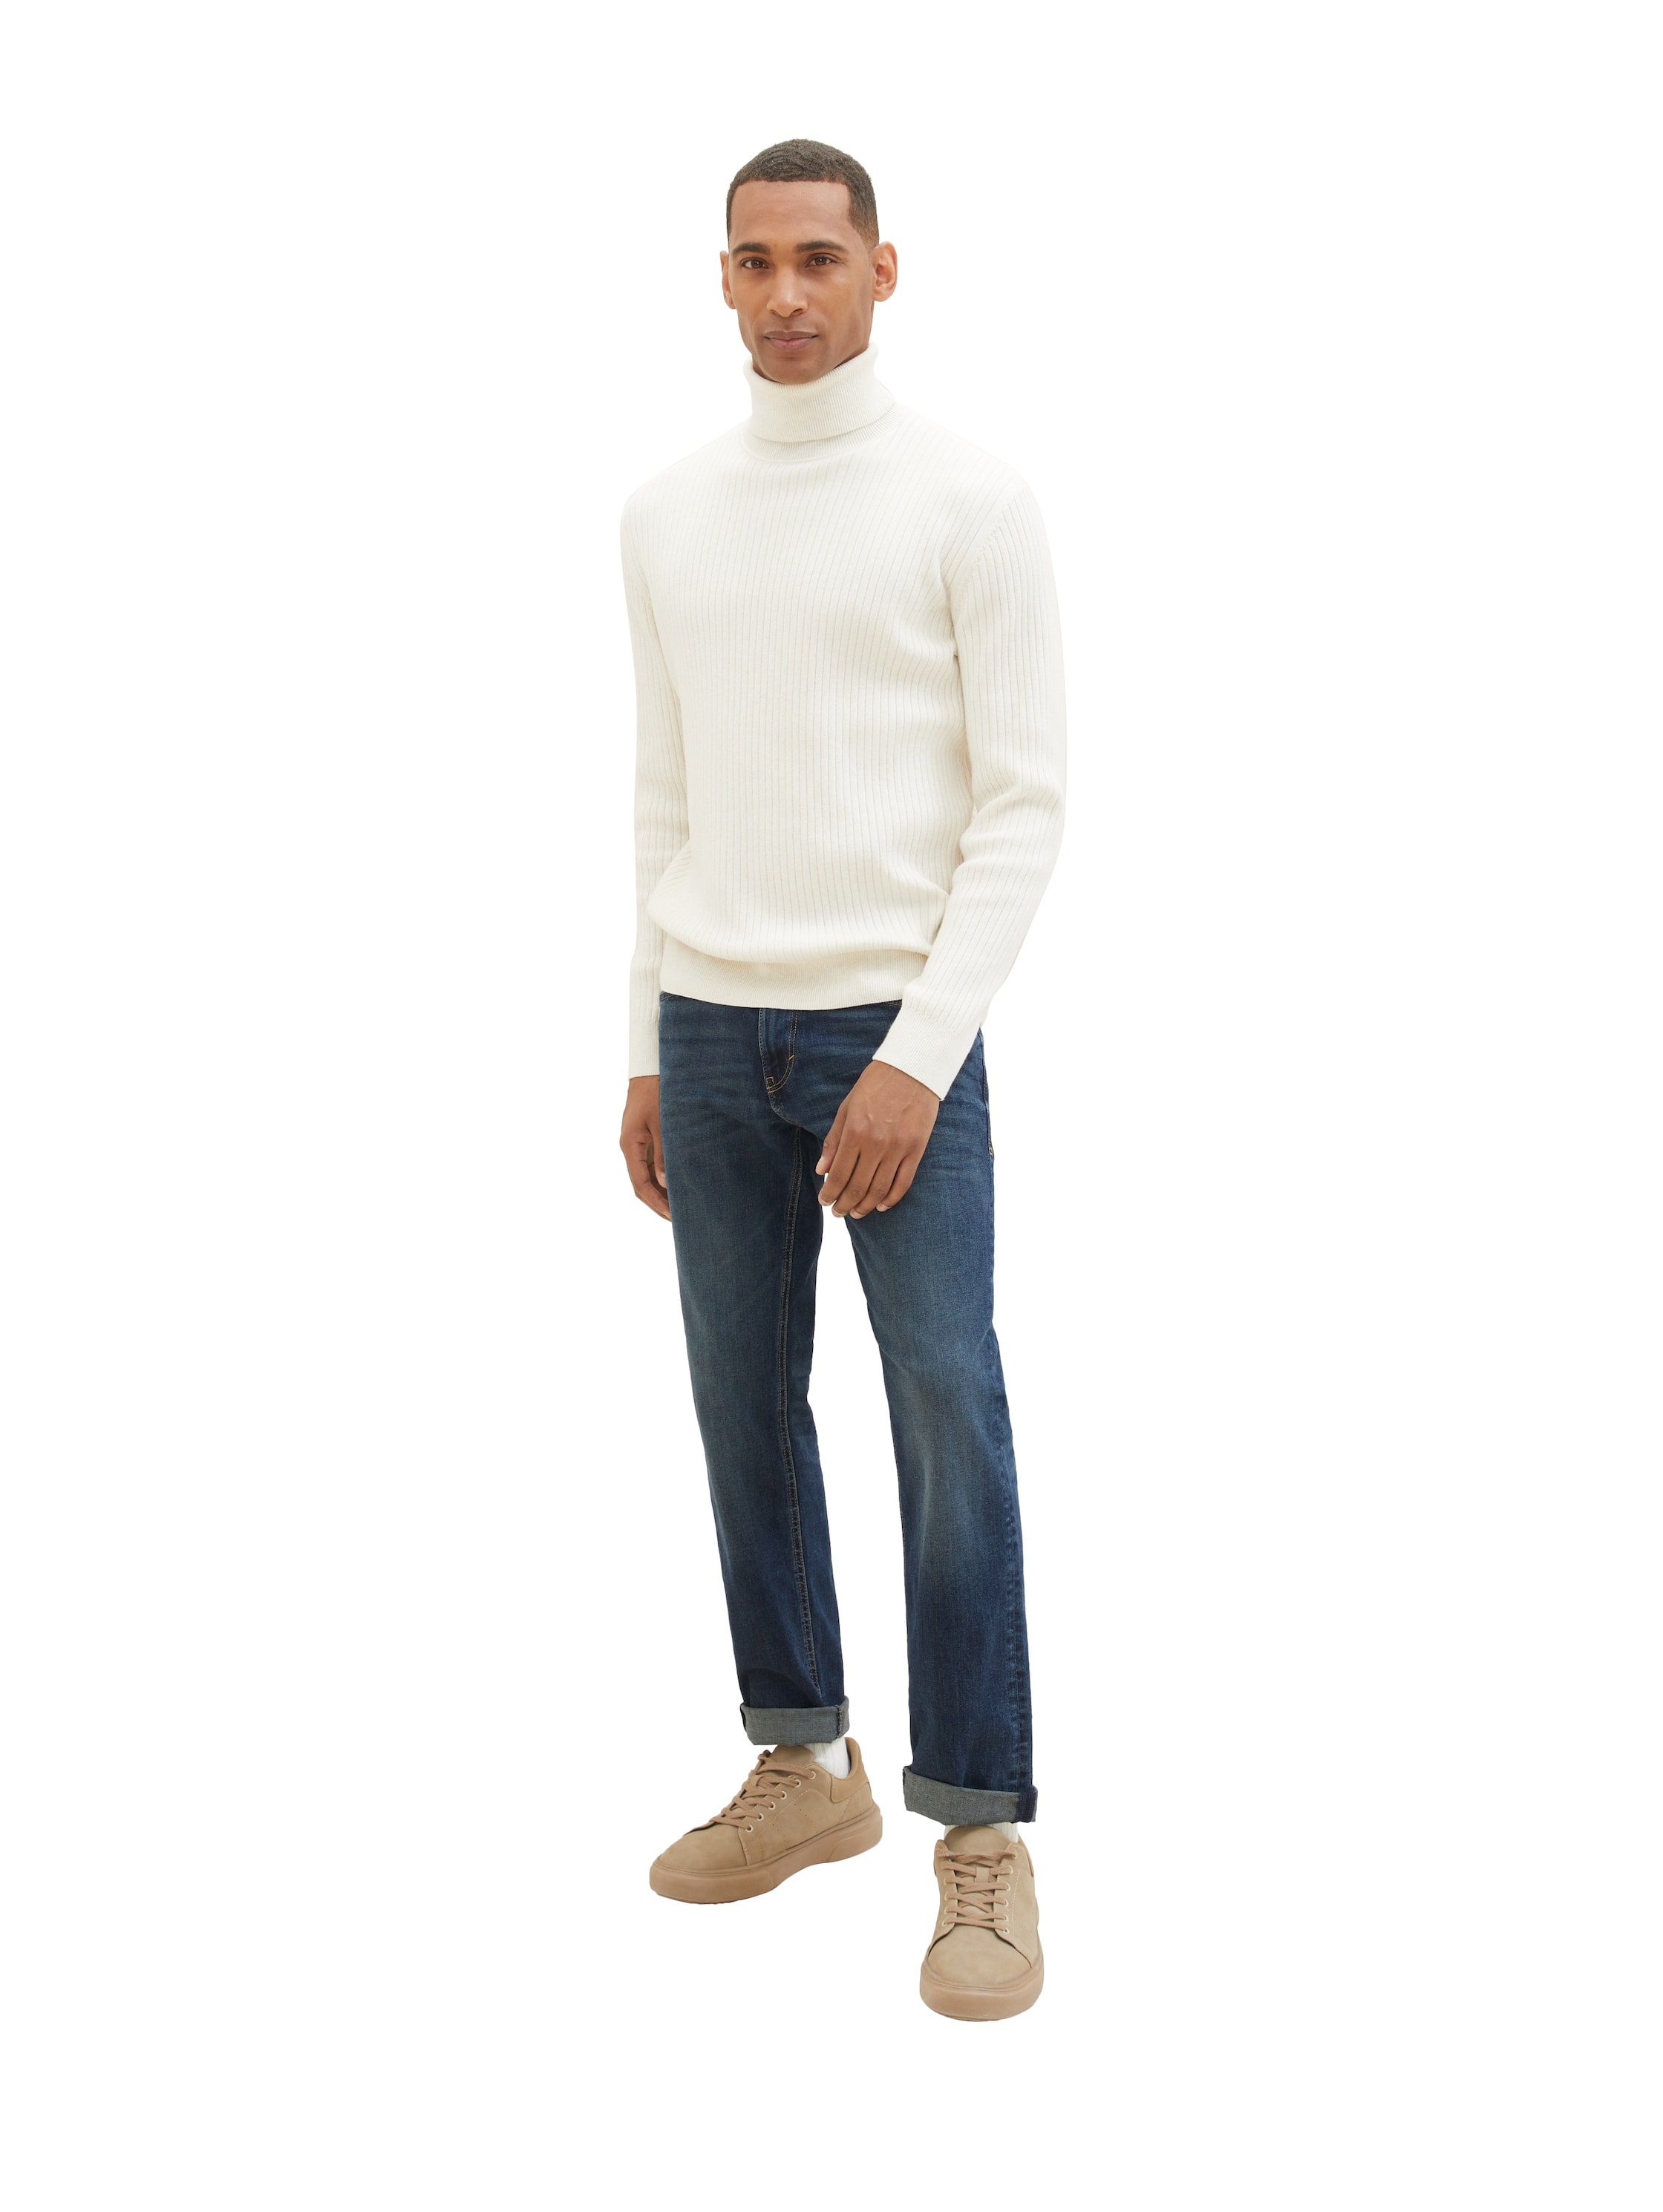 TOM TAILOR Straight-Jeans »MARVIN«